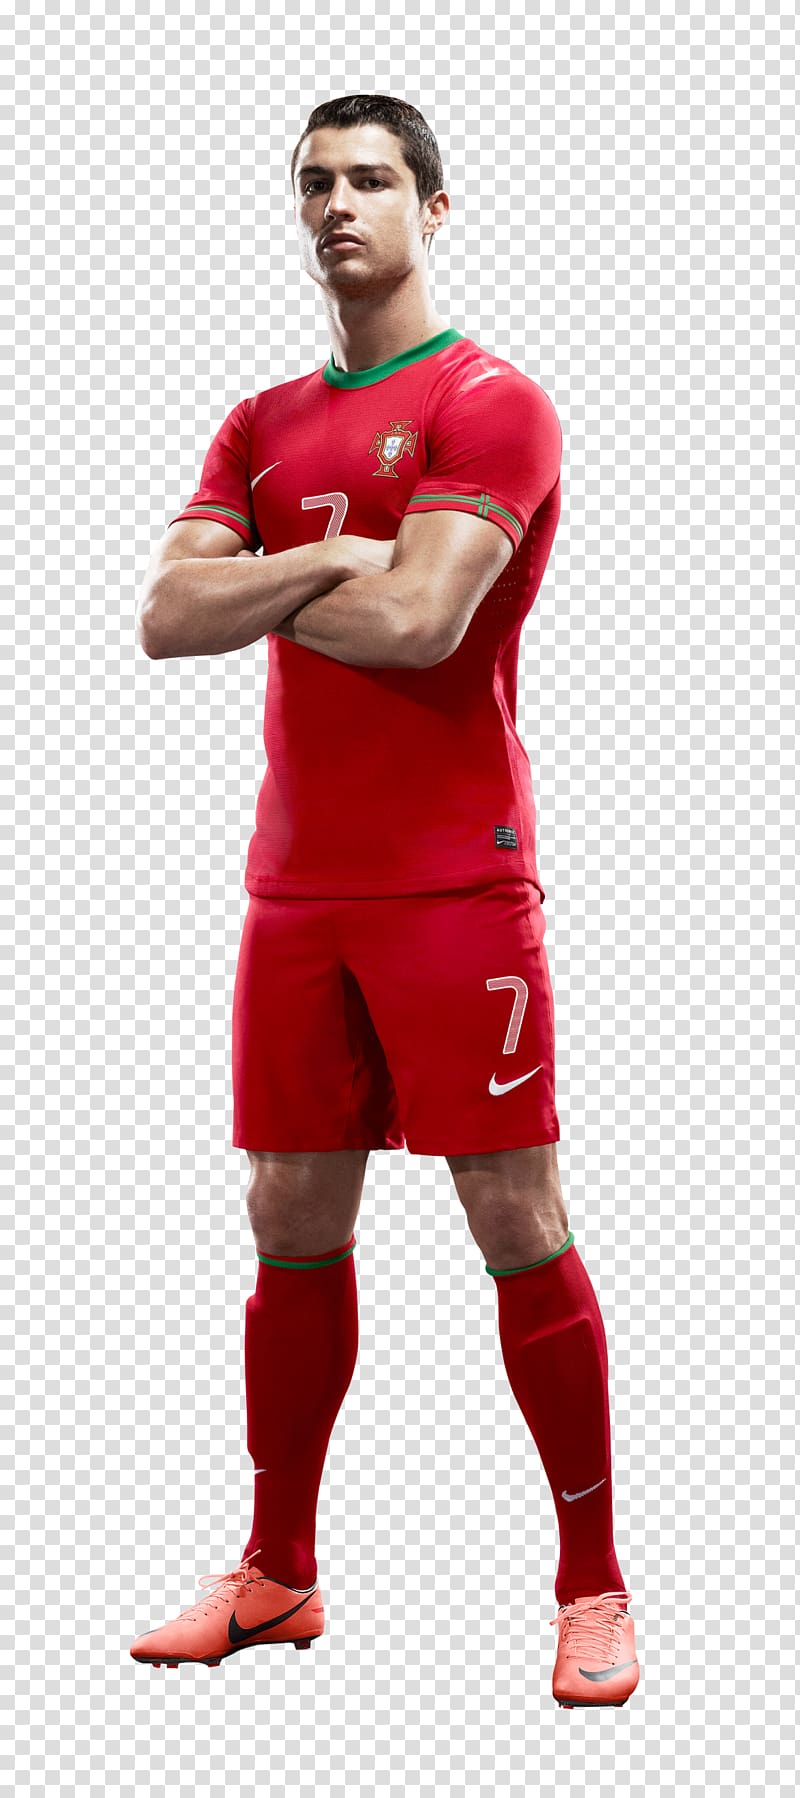 Cristiano Ronaldo Portugal national football team Real Madrid C.F. Jersey, Cristiano Ronaldo, male soccer player transparent background PNG clipart